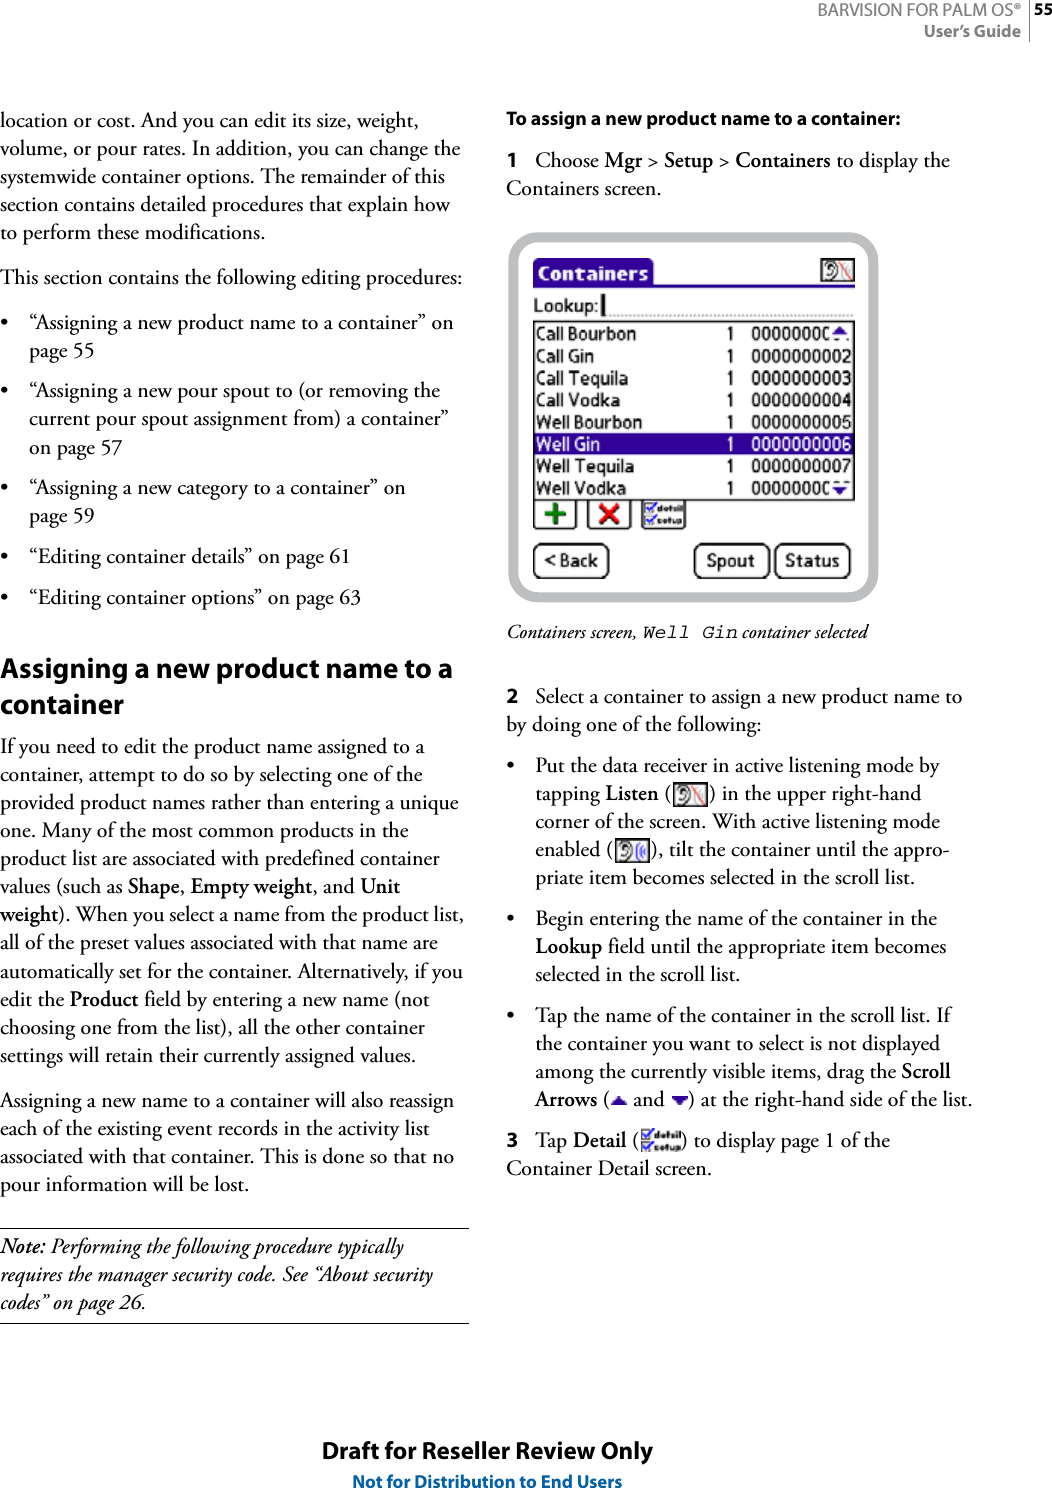 55BARVISION FOR PALM OS®User’s GuideDraft for Reseller Review OnlyNot for Distribution to End Userslocation or cost. And you can edit its size, weight, volume, or pour rates. In addition, you can change the systemwide container options. The remainder of this section contains detailed procedures that explain how to perform these modifications.This section contains the following editing procedures:• “Assigning a new product name to a container” on page 55• “Assigning a new pour spout to (or removing the current pour spout assignment from) a container” on page 57• “Assigning a new category to a container” on page 59• “Editing container details” on page 61• “Editing container options” on page 63Assigning a new product name to a containerIf you need to edit the product name assigned to a container, attempt to do so by selecting one of the provided product names rather than entering a unique one. Many of the most common products in the product list are associated with predefined container values (such as Shape, Empty weight, and Unit weight). When you select a name from the product list, all of the preset values associated with that name are automatically set for the container. Alternatively, if you edit the Product field by entering a new name (not choosing one from the list), all the other container settings will retain their currently assigned values.Assigning a new name to a container will also reassign each of the existing event records in the activity list associated with that container. This is done so that no pour information will be lost.Note: Performing the following procedure typically requires the manager security code. See “About security codes” on page 26.To assign a new product name to a container:1Choose Mgr &gt; Setup &gt; Containers to display the Containers screen.Containers screen, Well Gin container selected2Select a container to assign a new product name to by doing one of the following:• Put the data receiver in active listening mode by tapping Listen ( ) in the upper right-hand corner of the screen. With active listening mode enabled ( ), tilt the container until the appro-priate item becomes selected in the scroll list.• Begin entering the name of the container in the Lookup field until the appropriate item becomes selected in the scroll list.• Tap the name of the container in the scroll list. If the container you want to select is not displayed among the currently visible items, drag the Scroll Arrows (  and  ) at the right-hand side of the list.3Tap  Detail ( ) to display page 1 of the Container Detail screen.